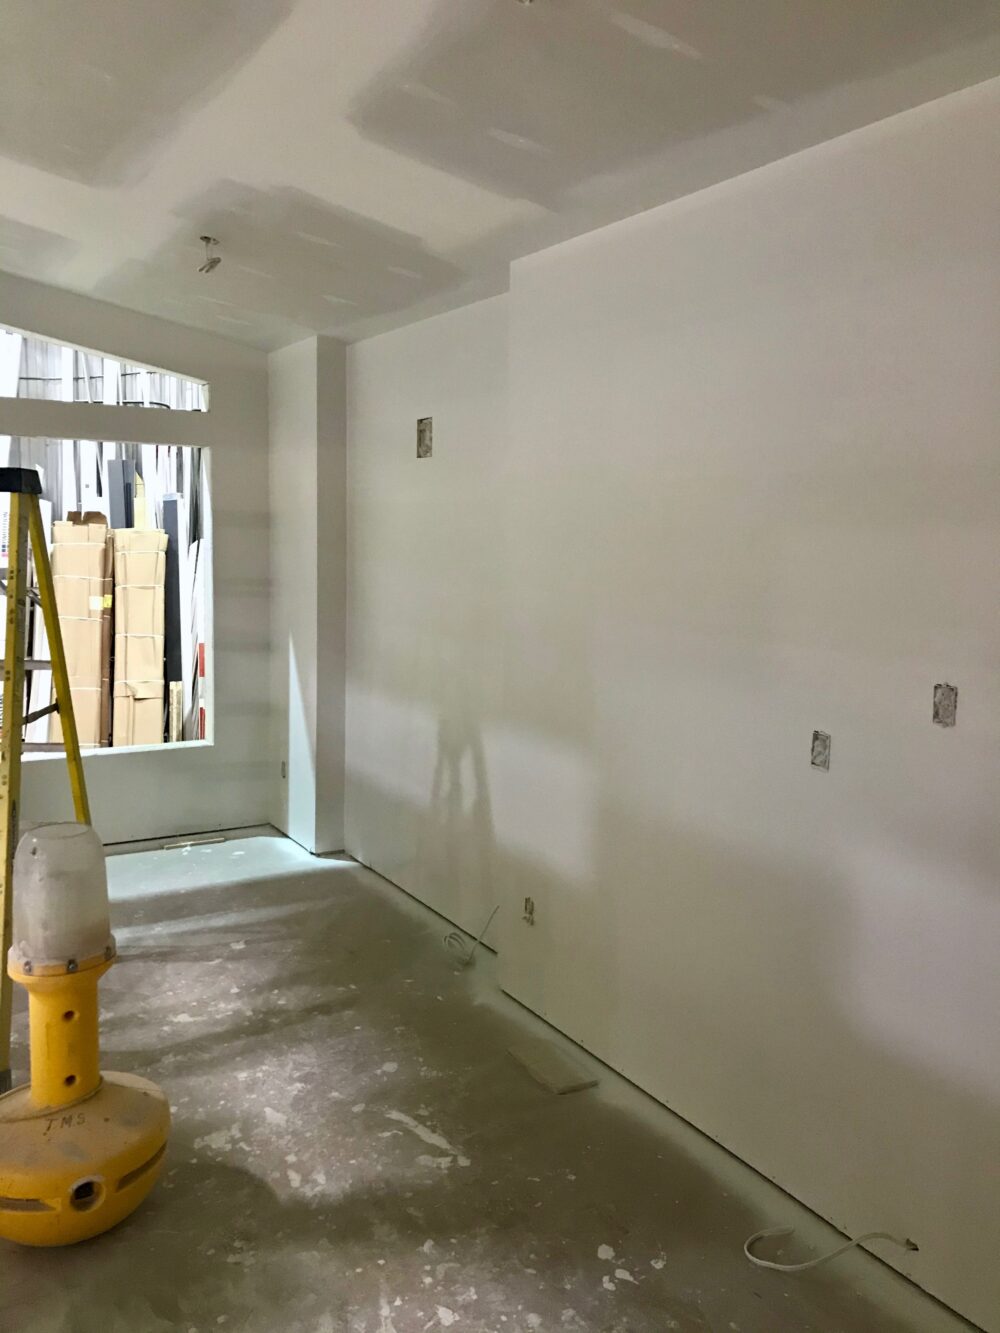 Drywall (Mud & Tape) Construction